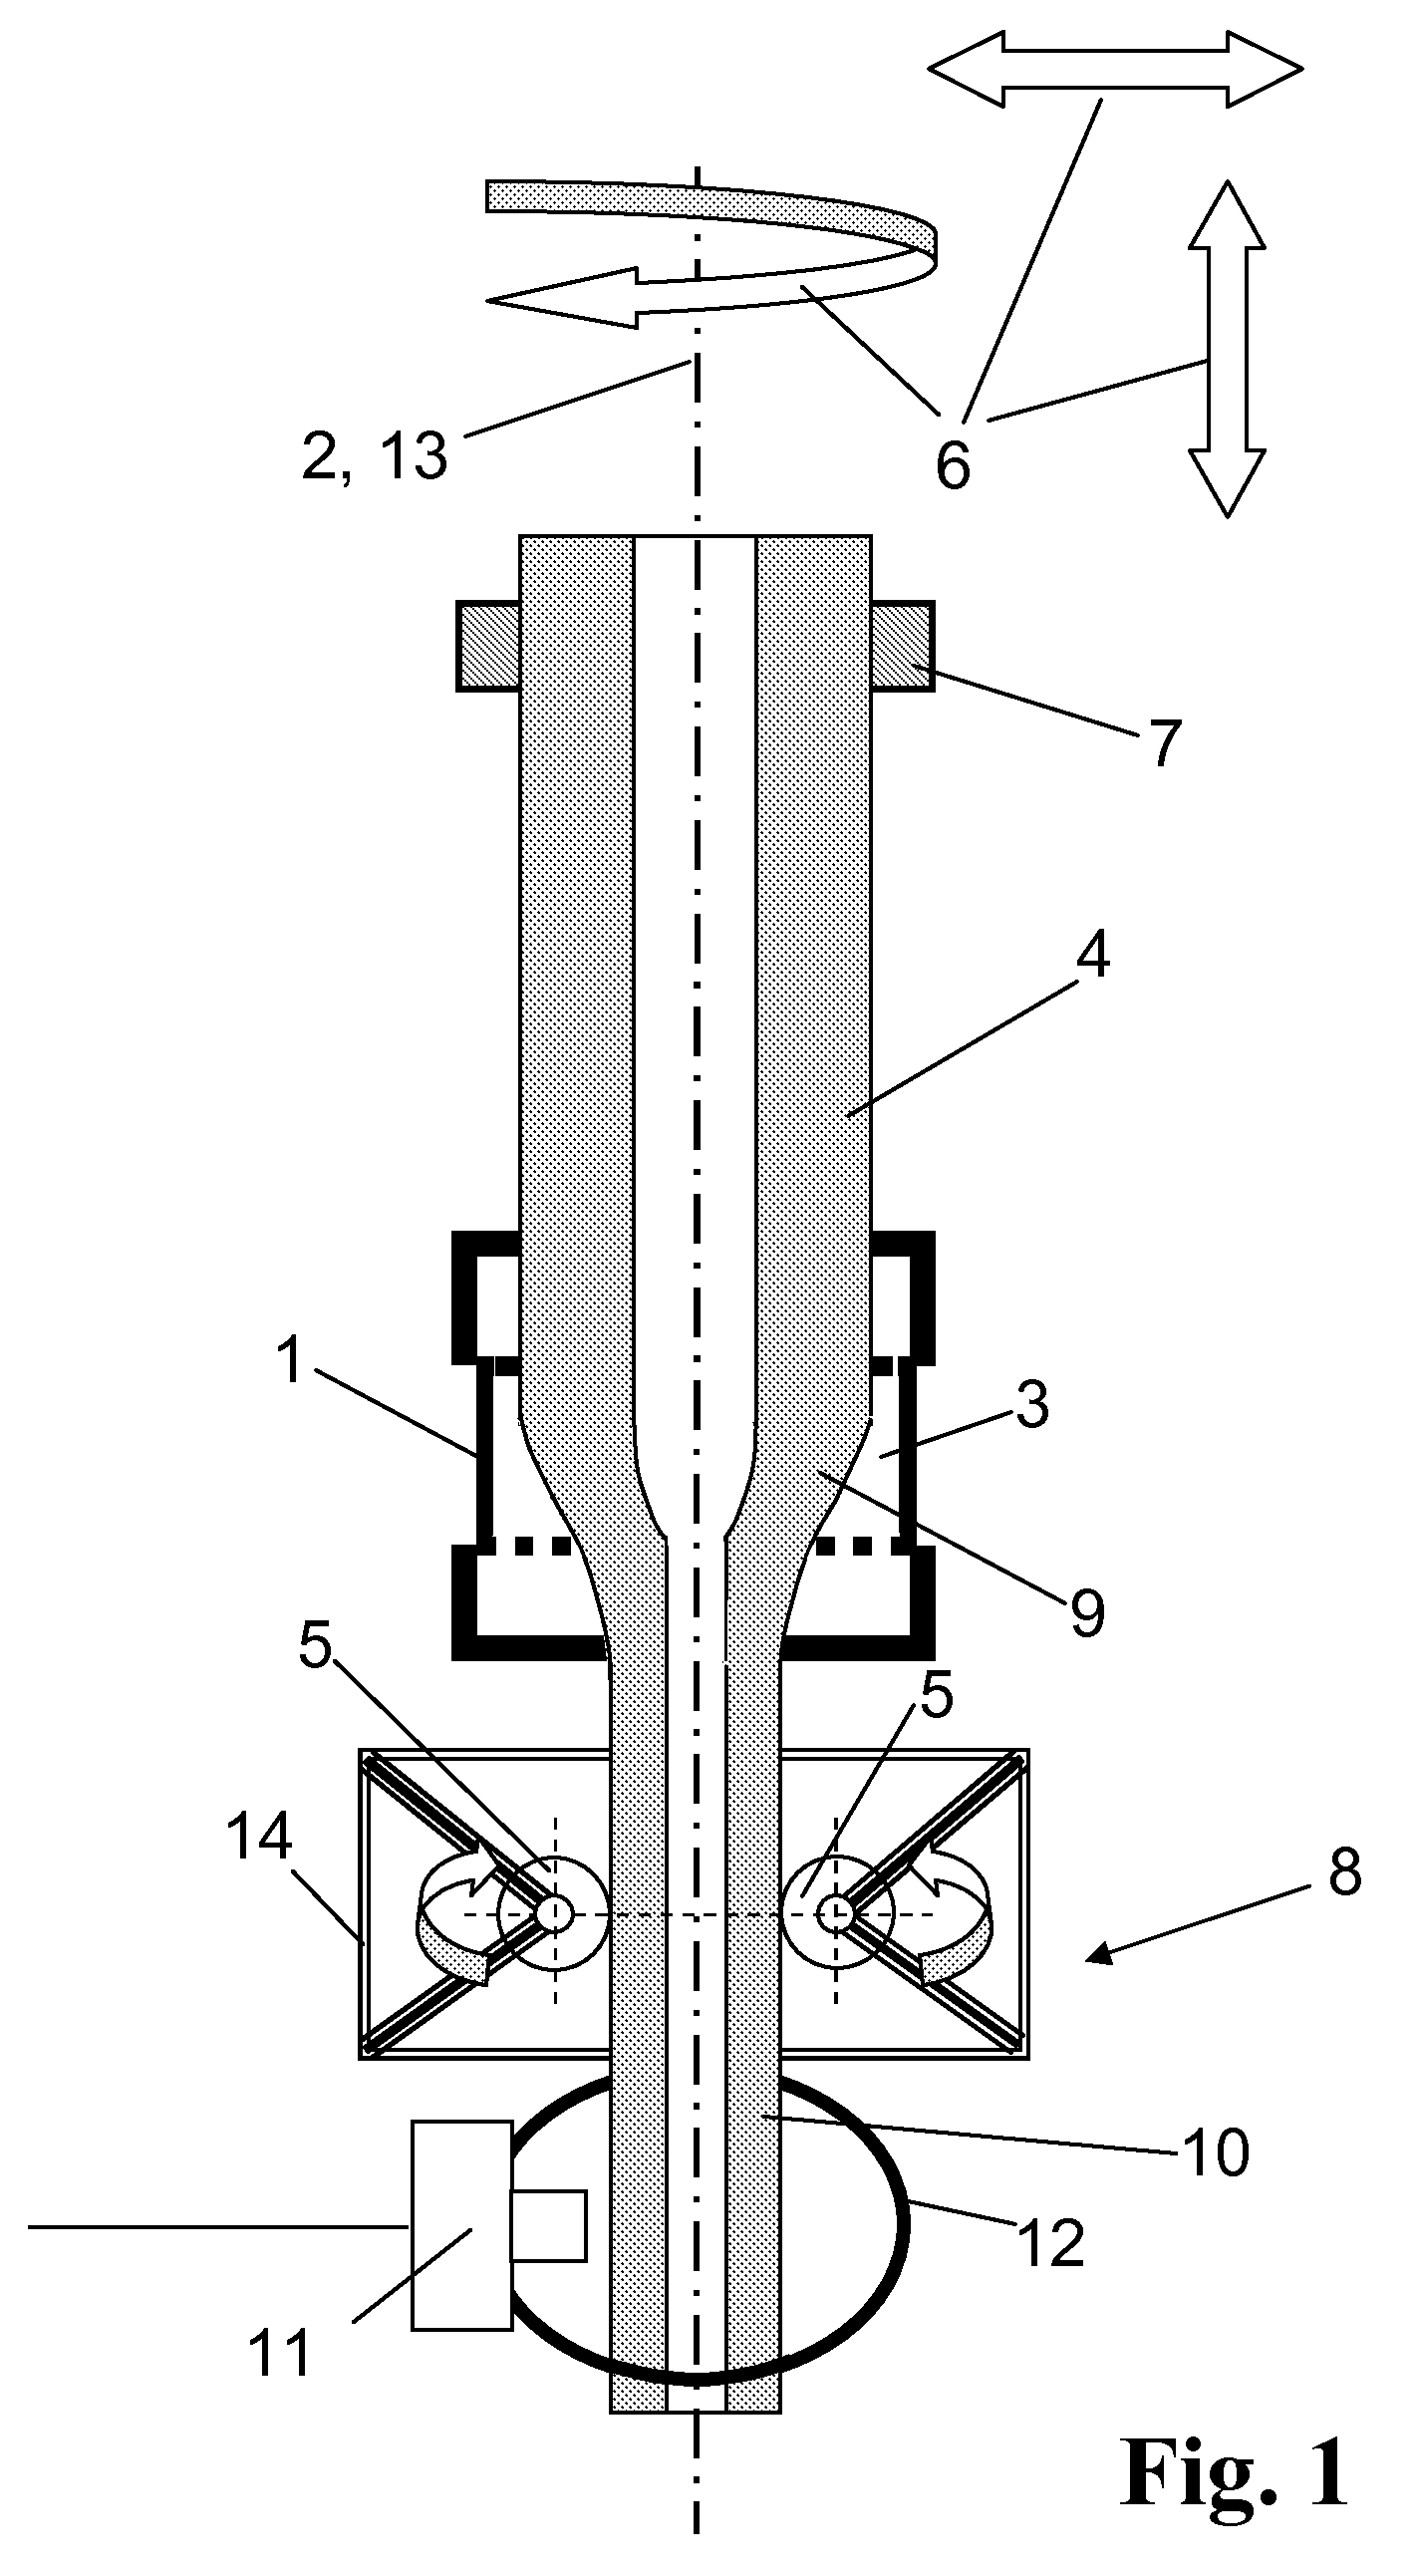 Method for producing a tube of quartz glass by elongating a hollow cylinder of quartz glass